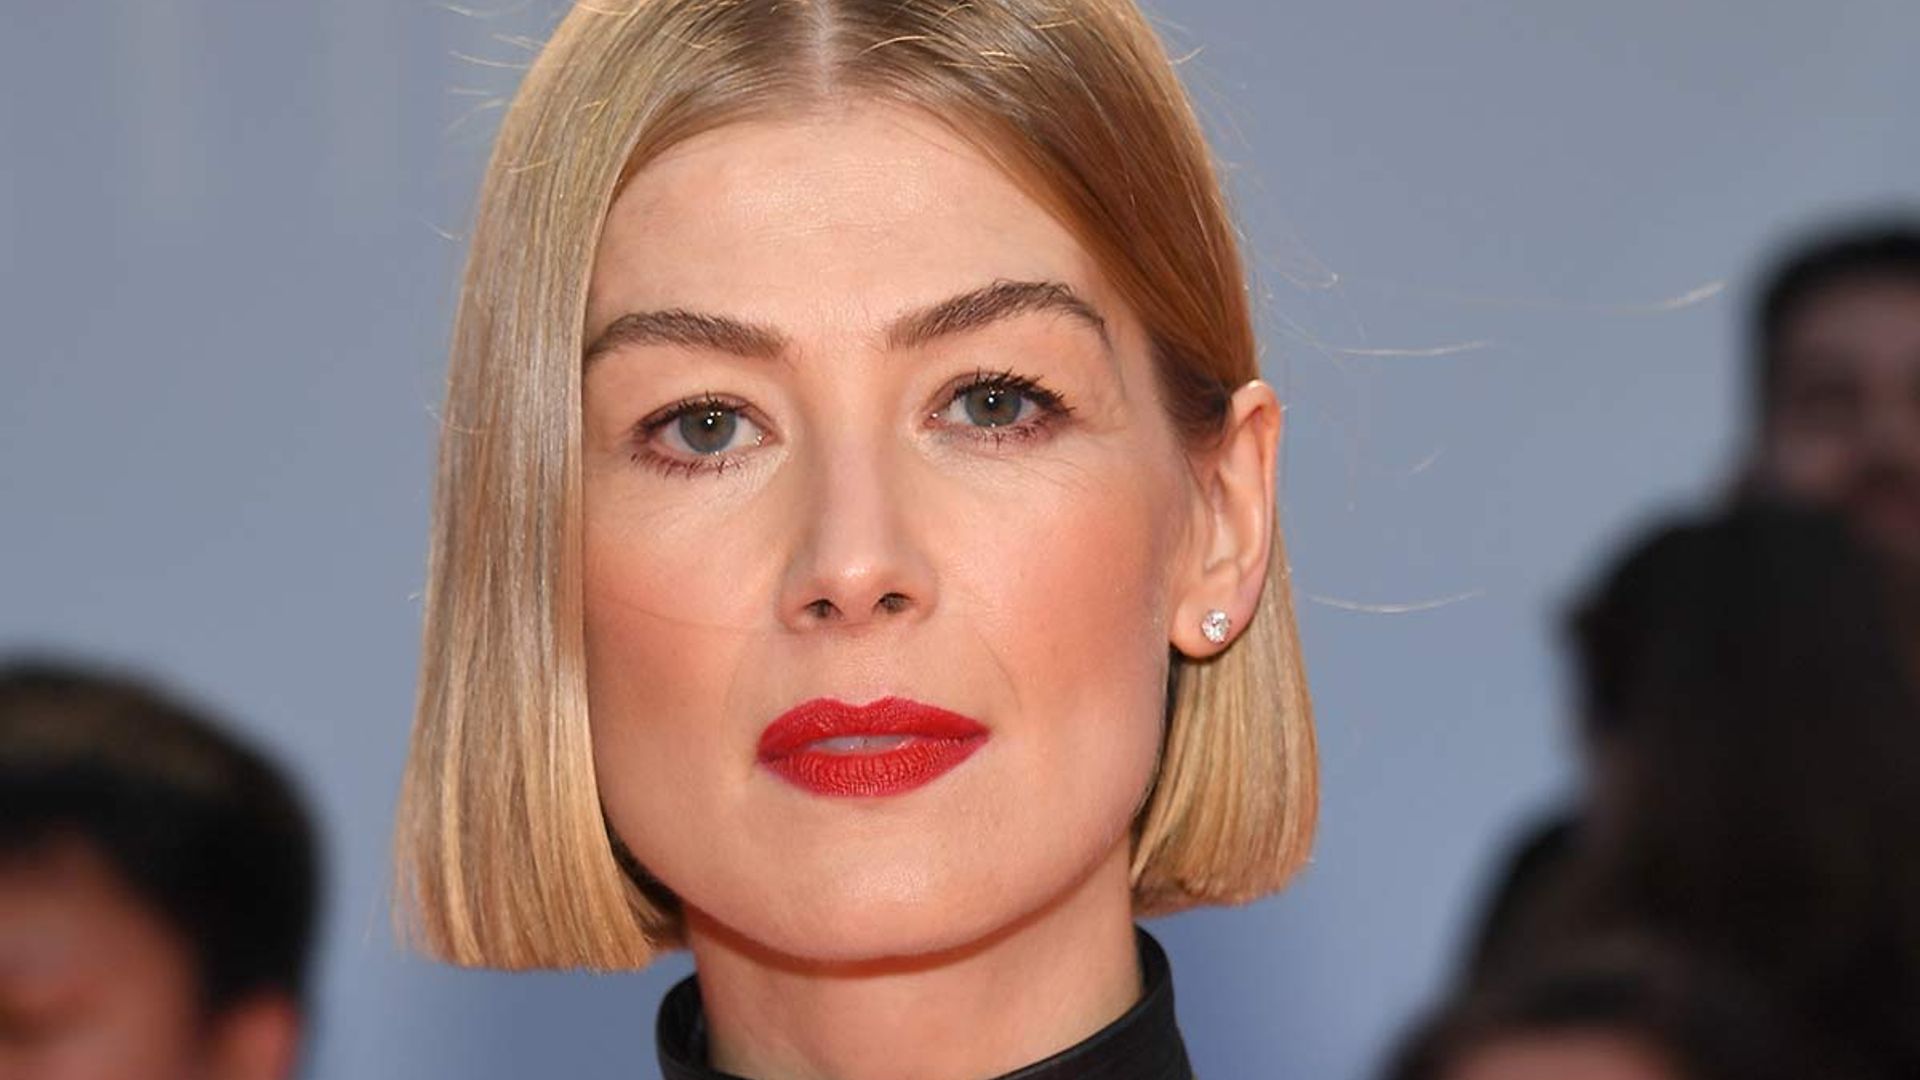 I Care A Lot's Rosamund Pike displays trim waist in dramatic plunging gown